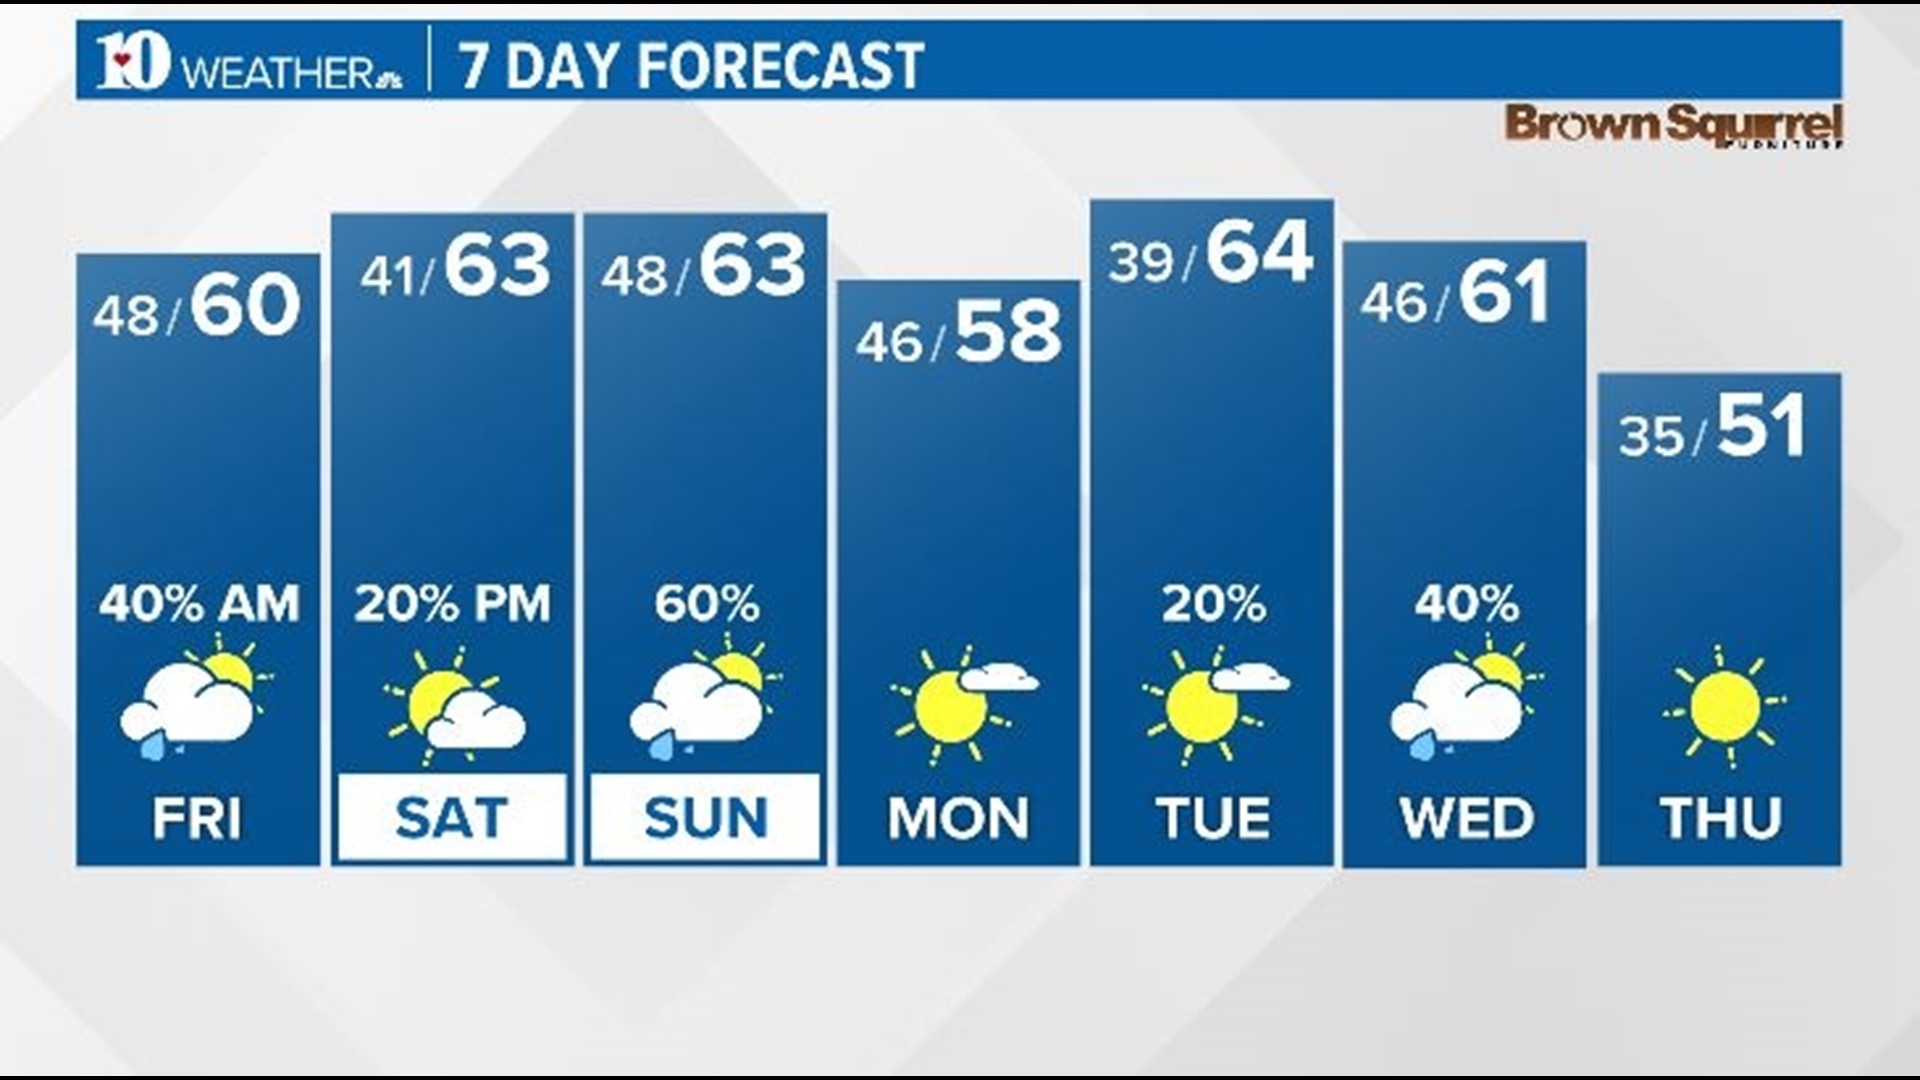 Temperatures remain above average into the weekend